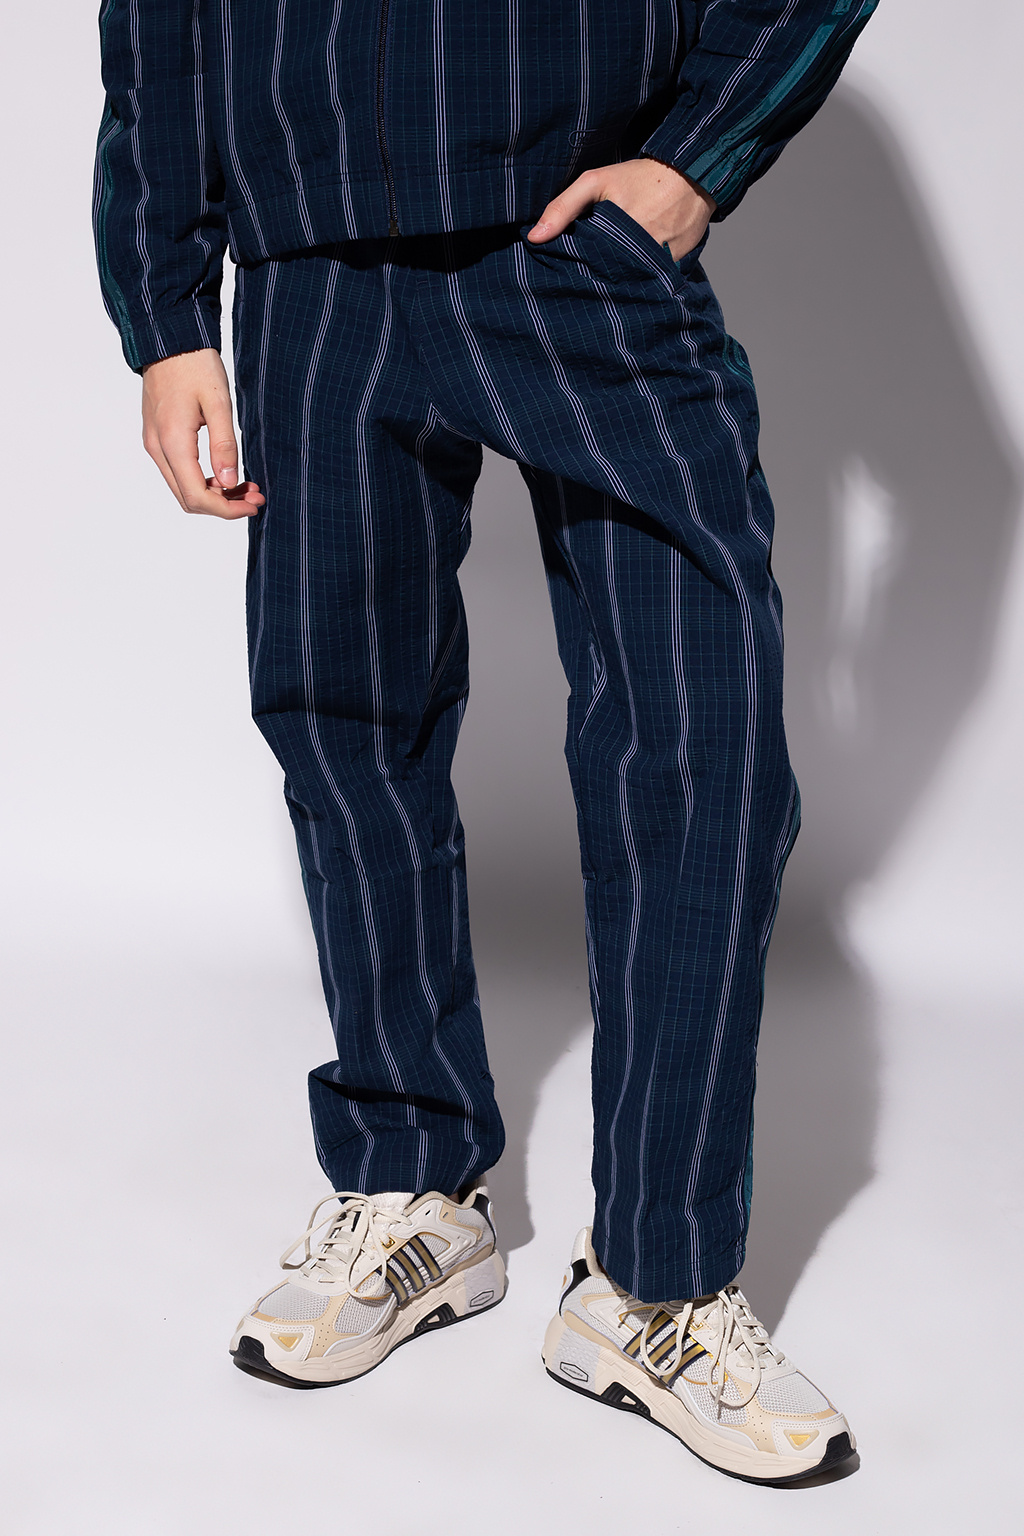 ADIDAS Originals Patterned trousers